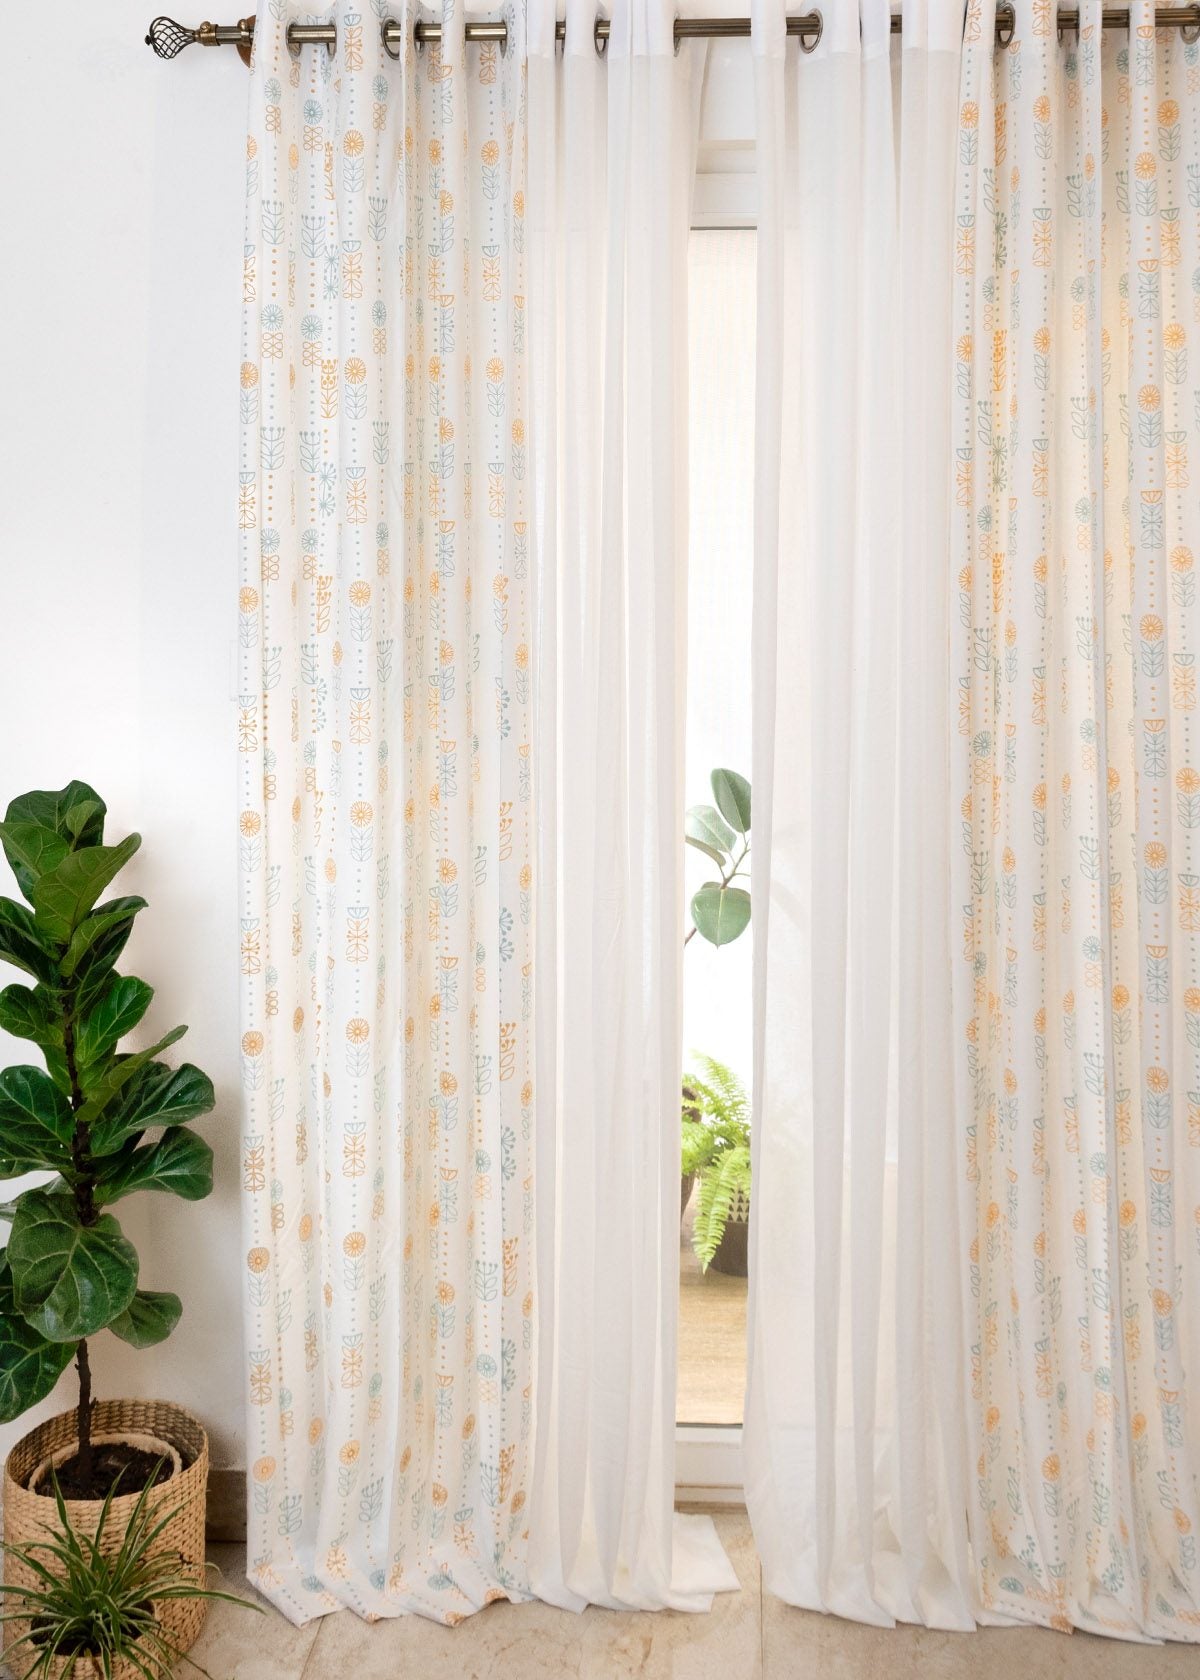 Wild Bouquet Corn Yellow, Warm White Solid Sheer Set Of 4 Combo Cotton Curtain - Corn Yellow And White